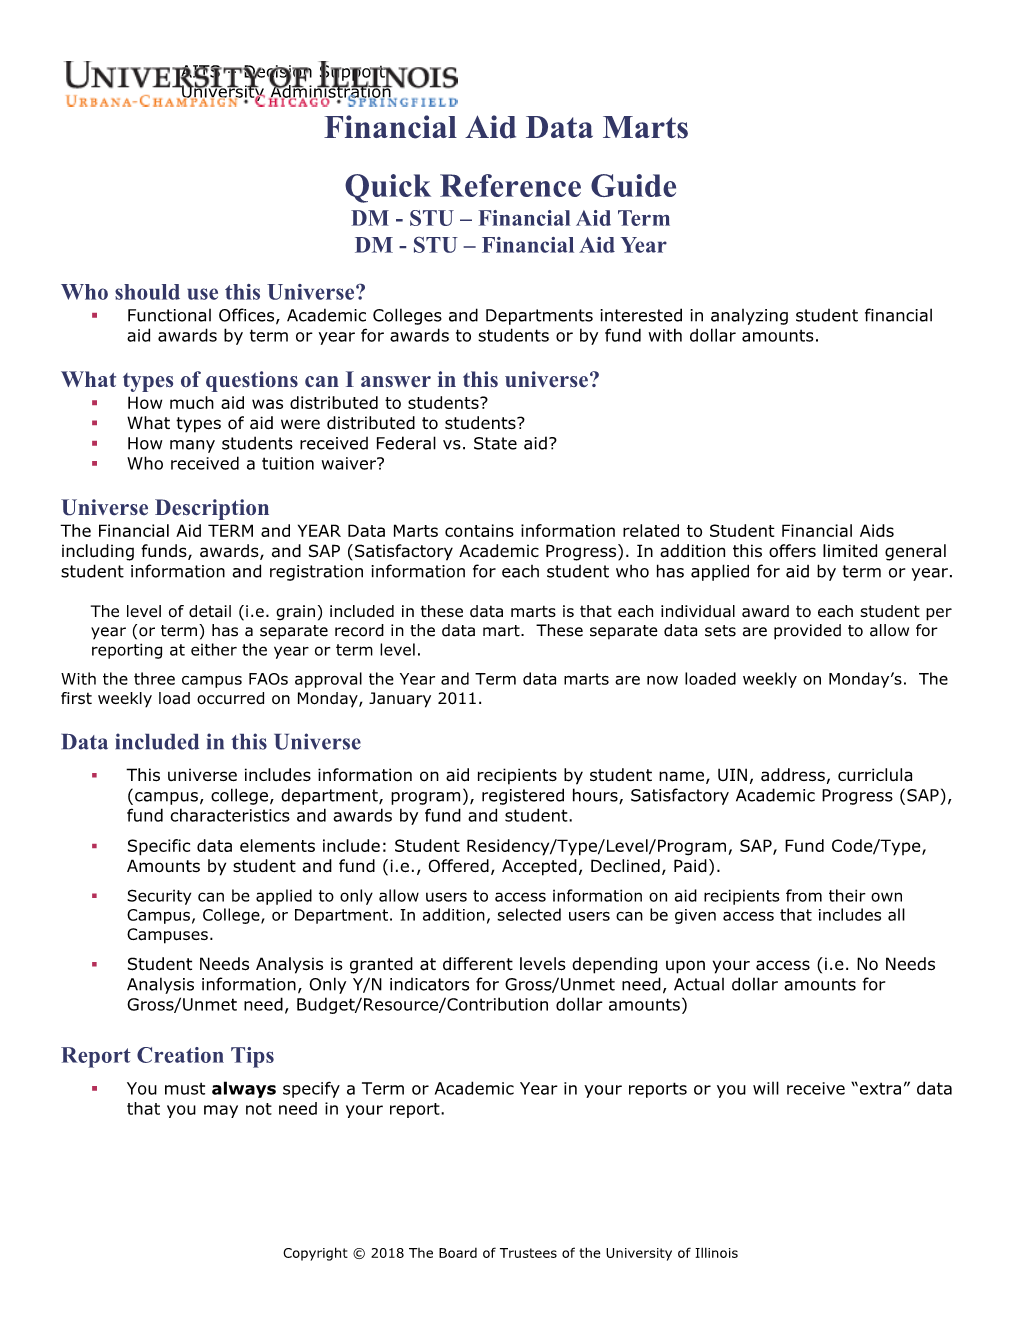 Quick Reference Guide DM - STU Financial Aid Term